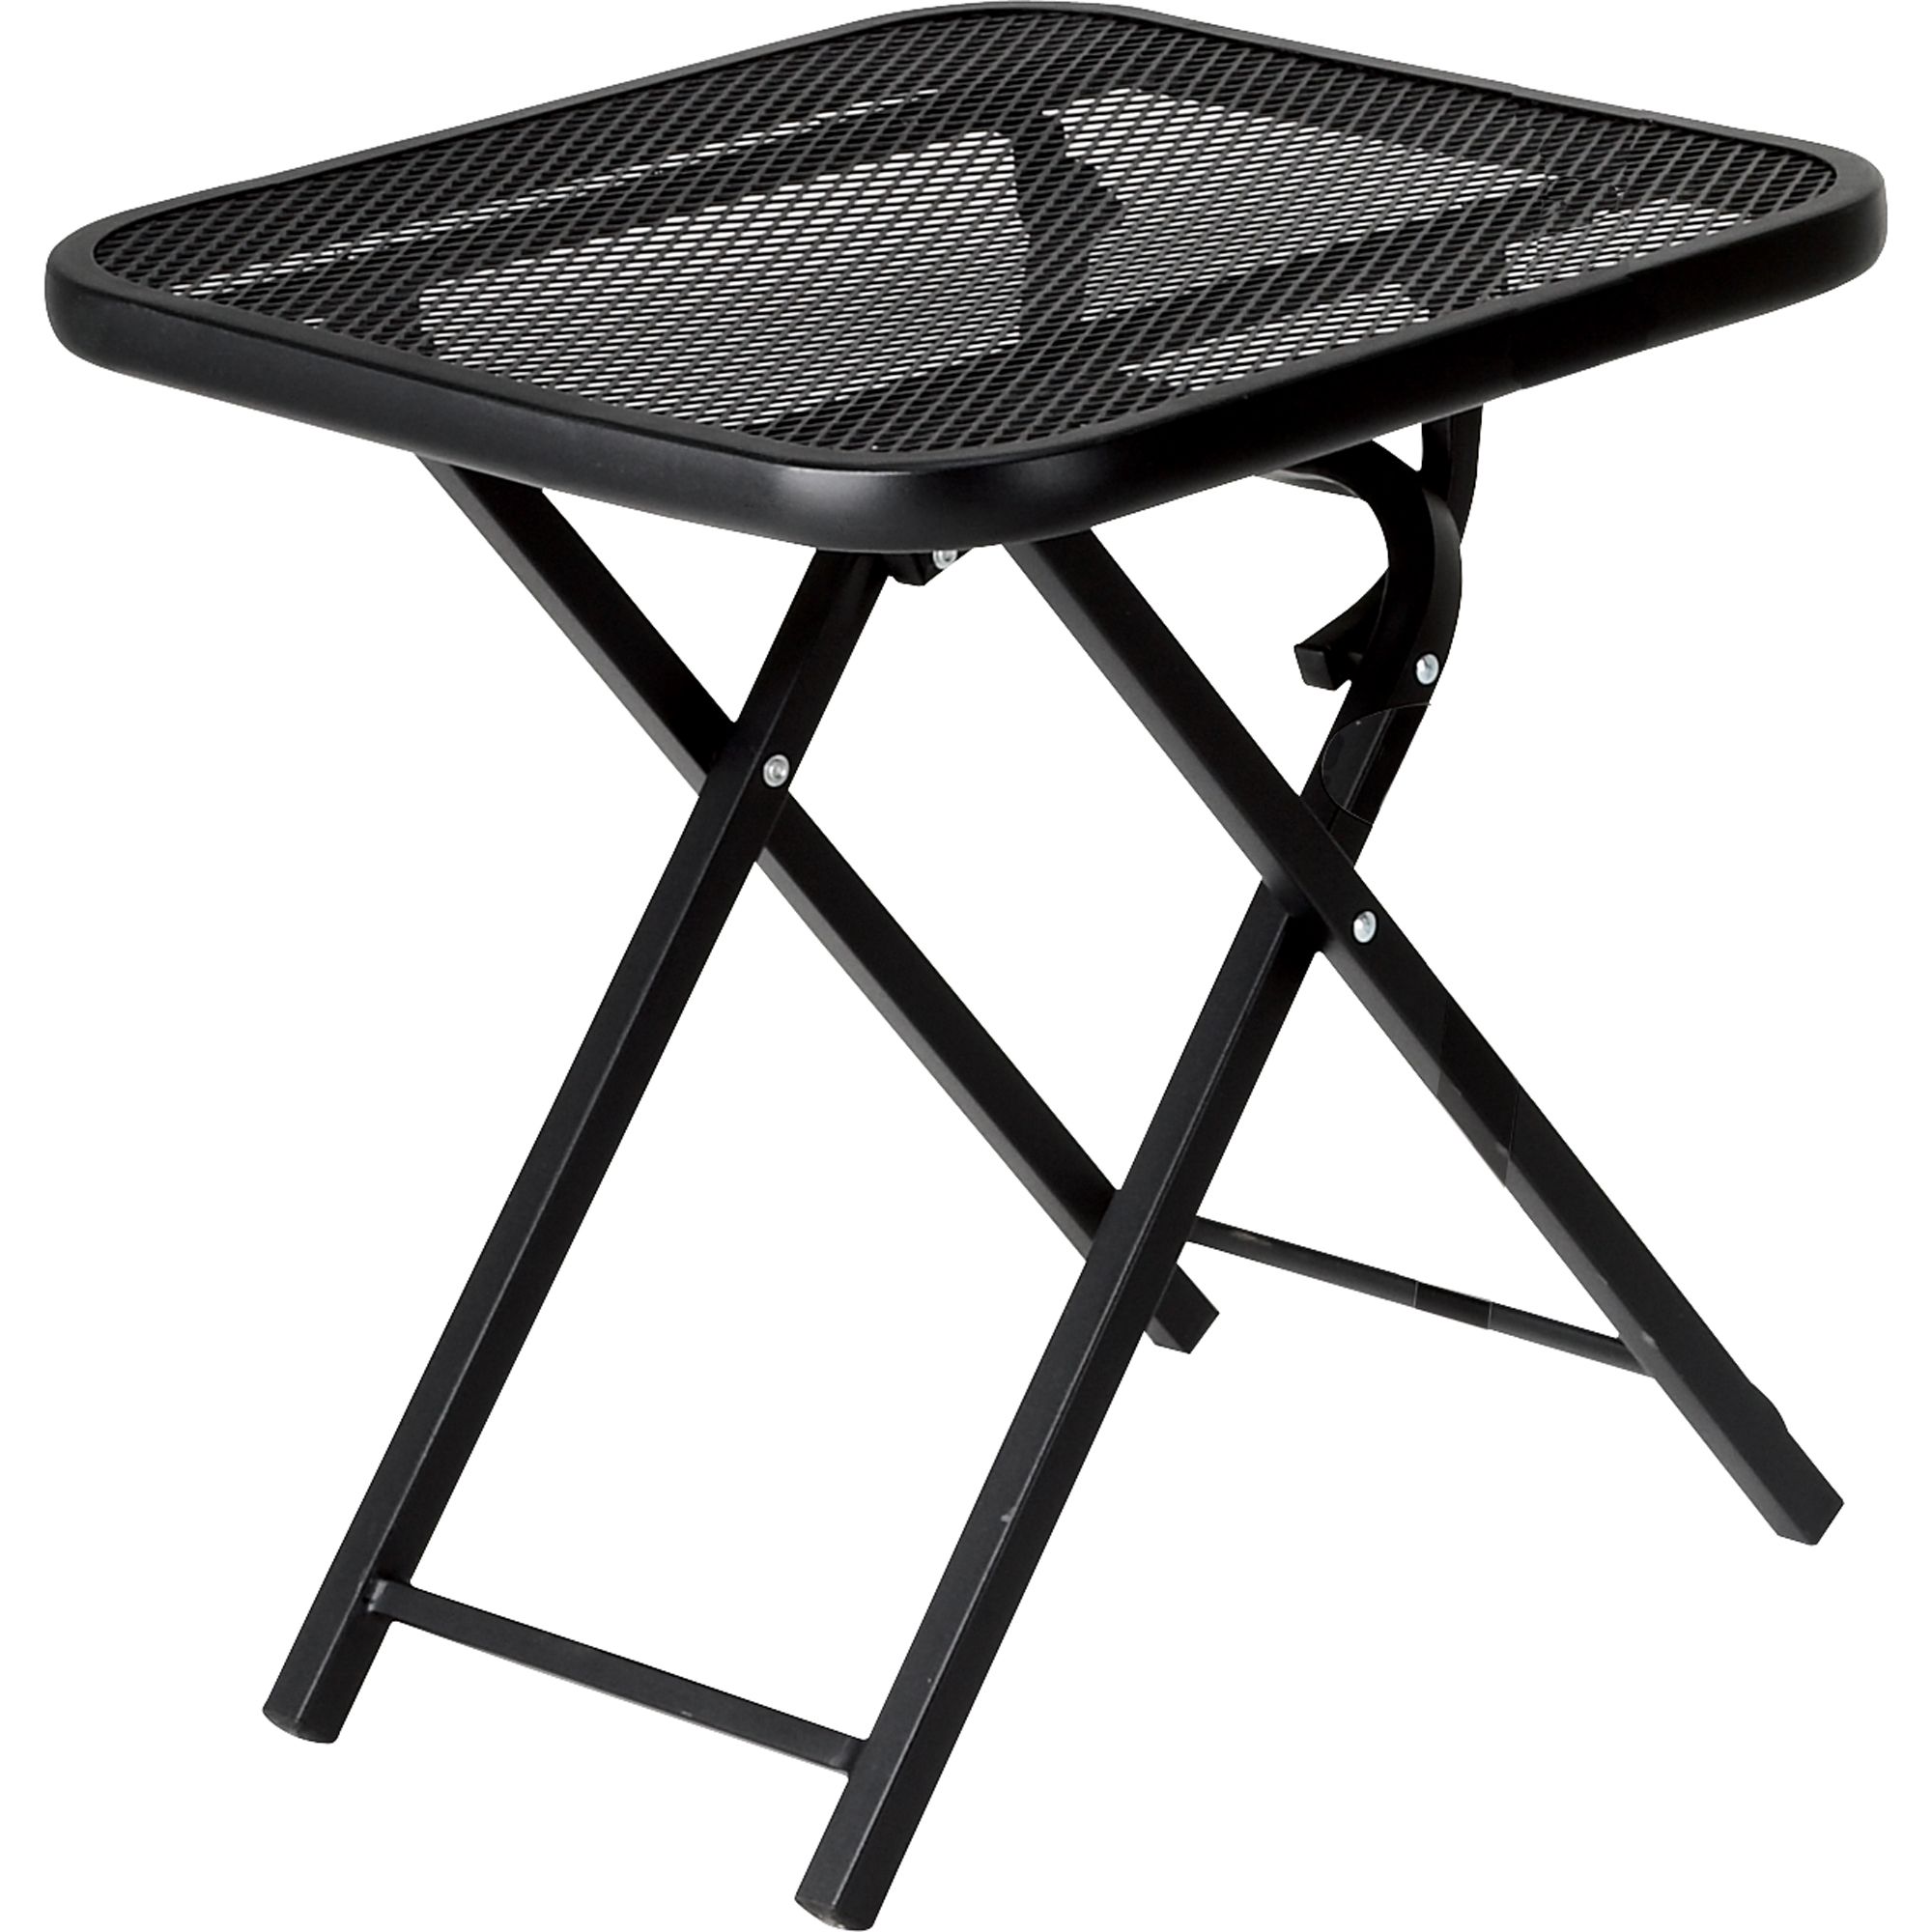 Garden Oasis Wrought Iron Folding Patio Table - Limited availability